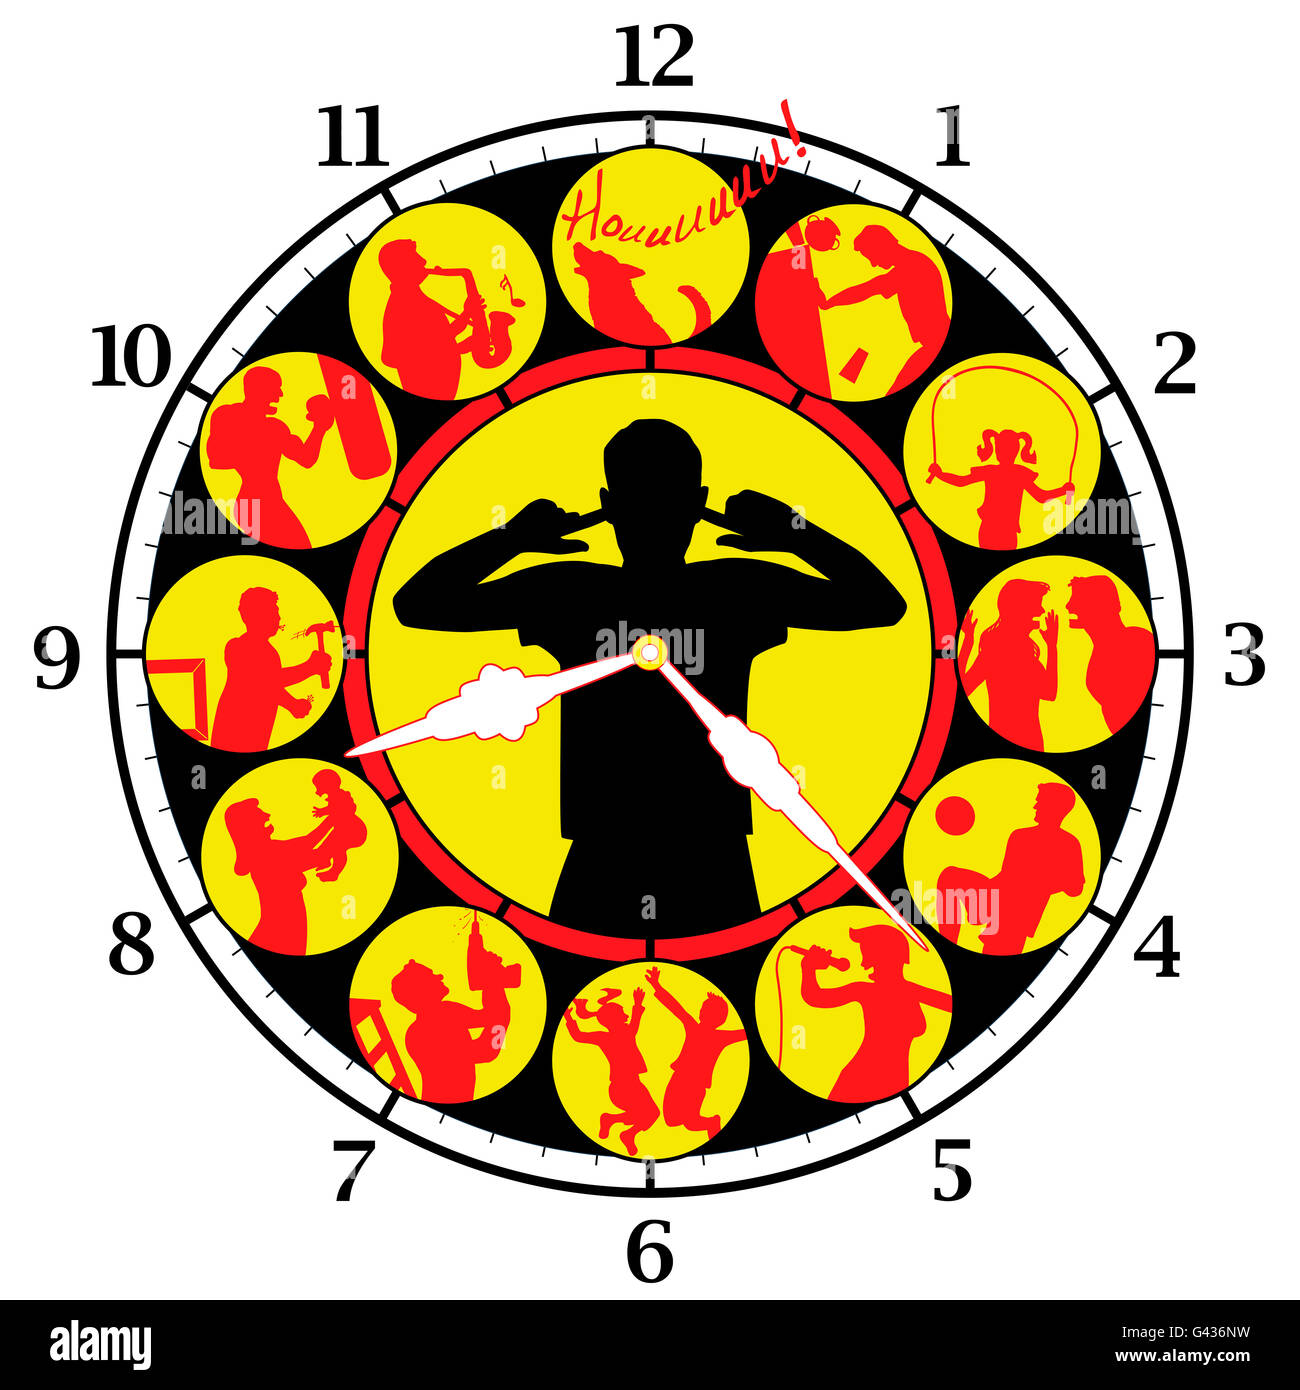 Neighborhood noise day and night - figured as a clock face with fussing neighbors around the clock. Stock Photo